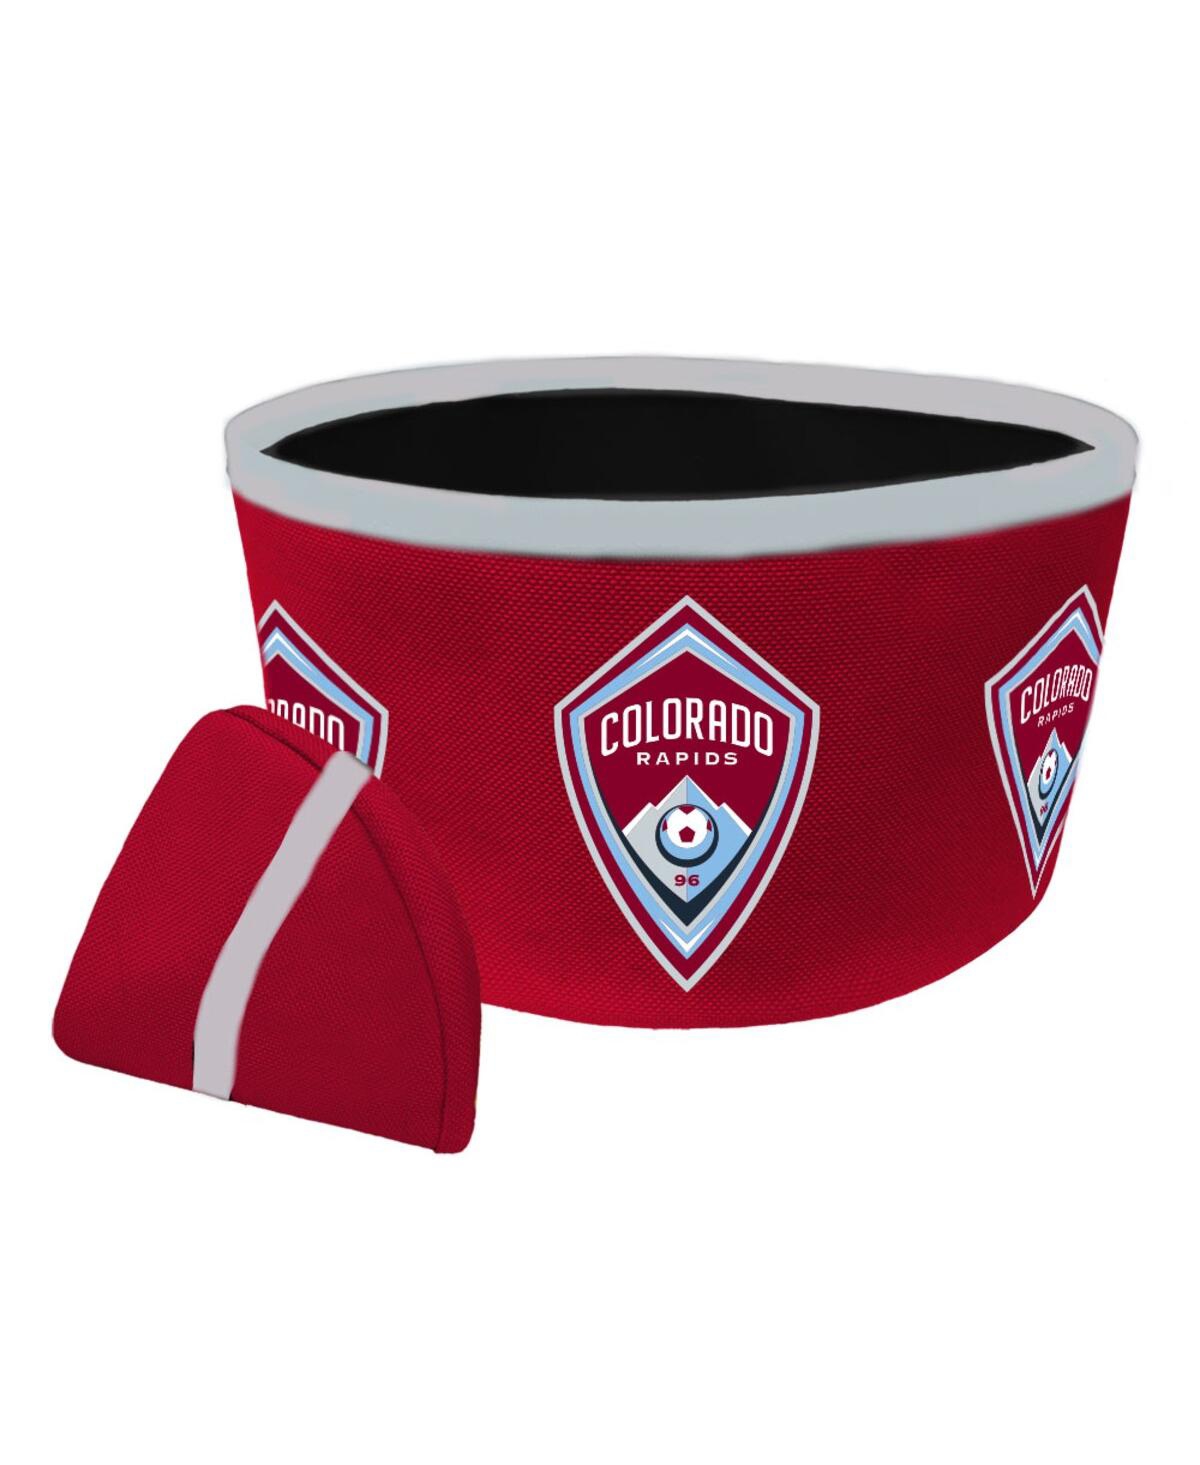 Colorado Rapids Collapsible Travel Dog Bowl - Maroon